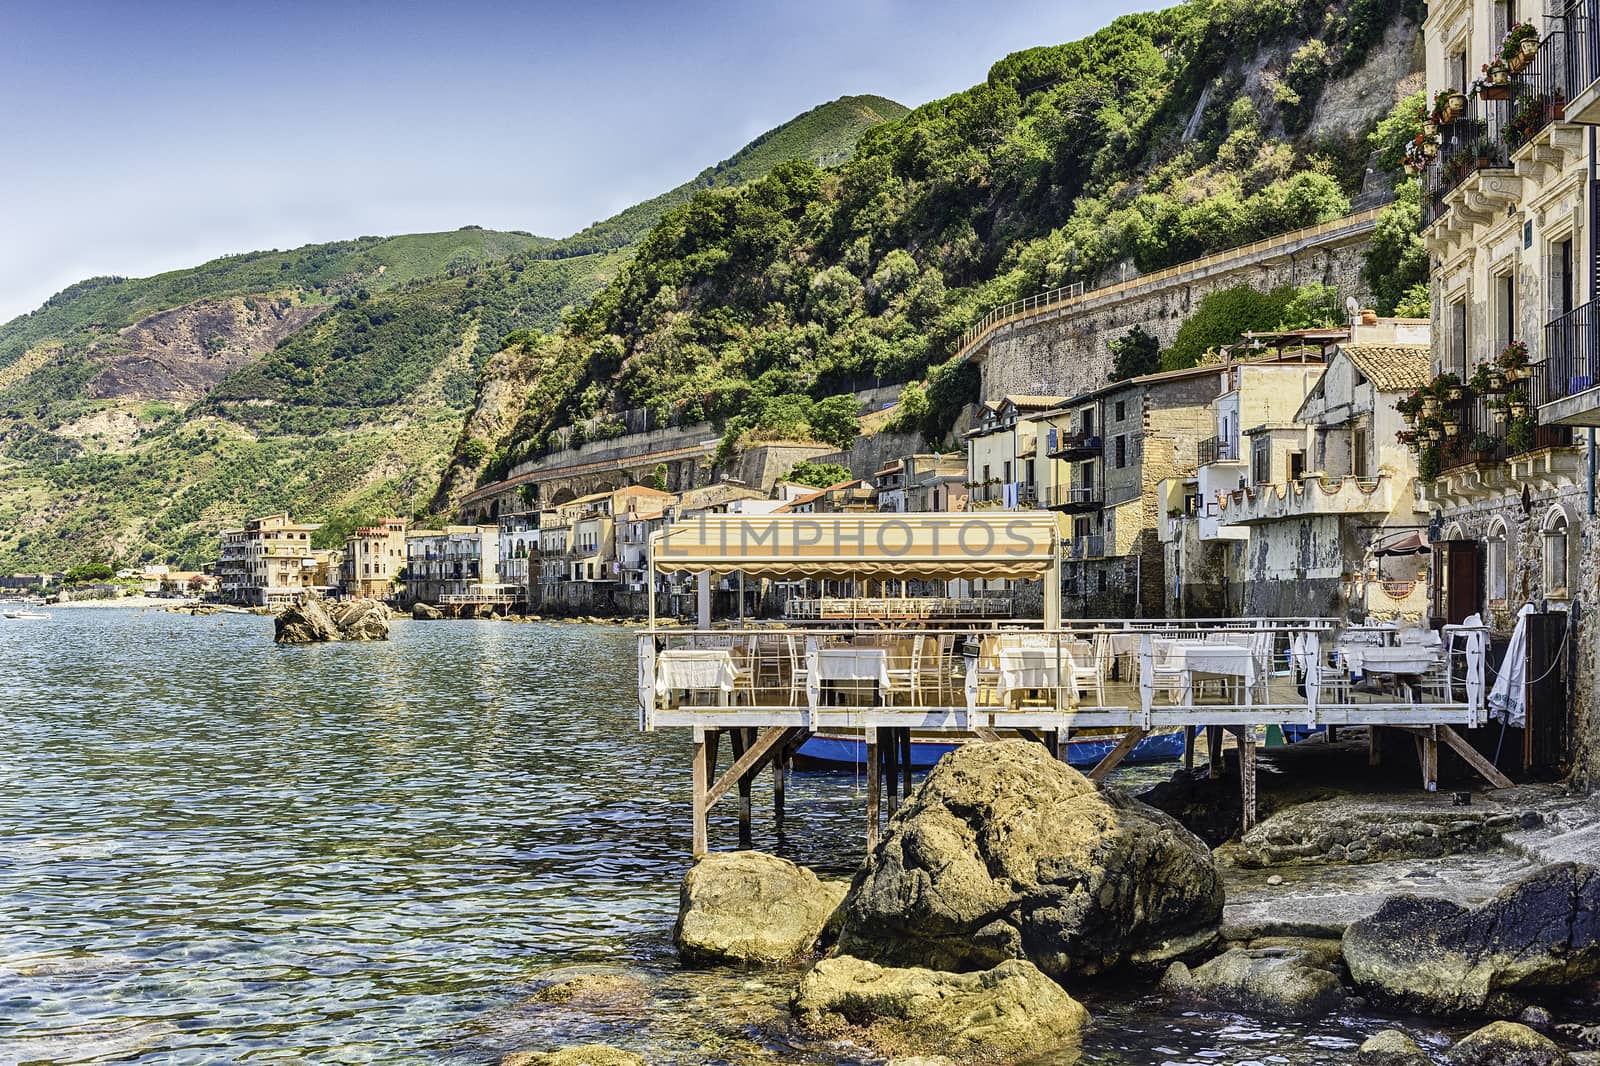 Beautiful seascape in the seaside village of Chianalea, fraction of Scilla, Calabria, Italy